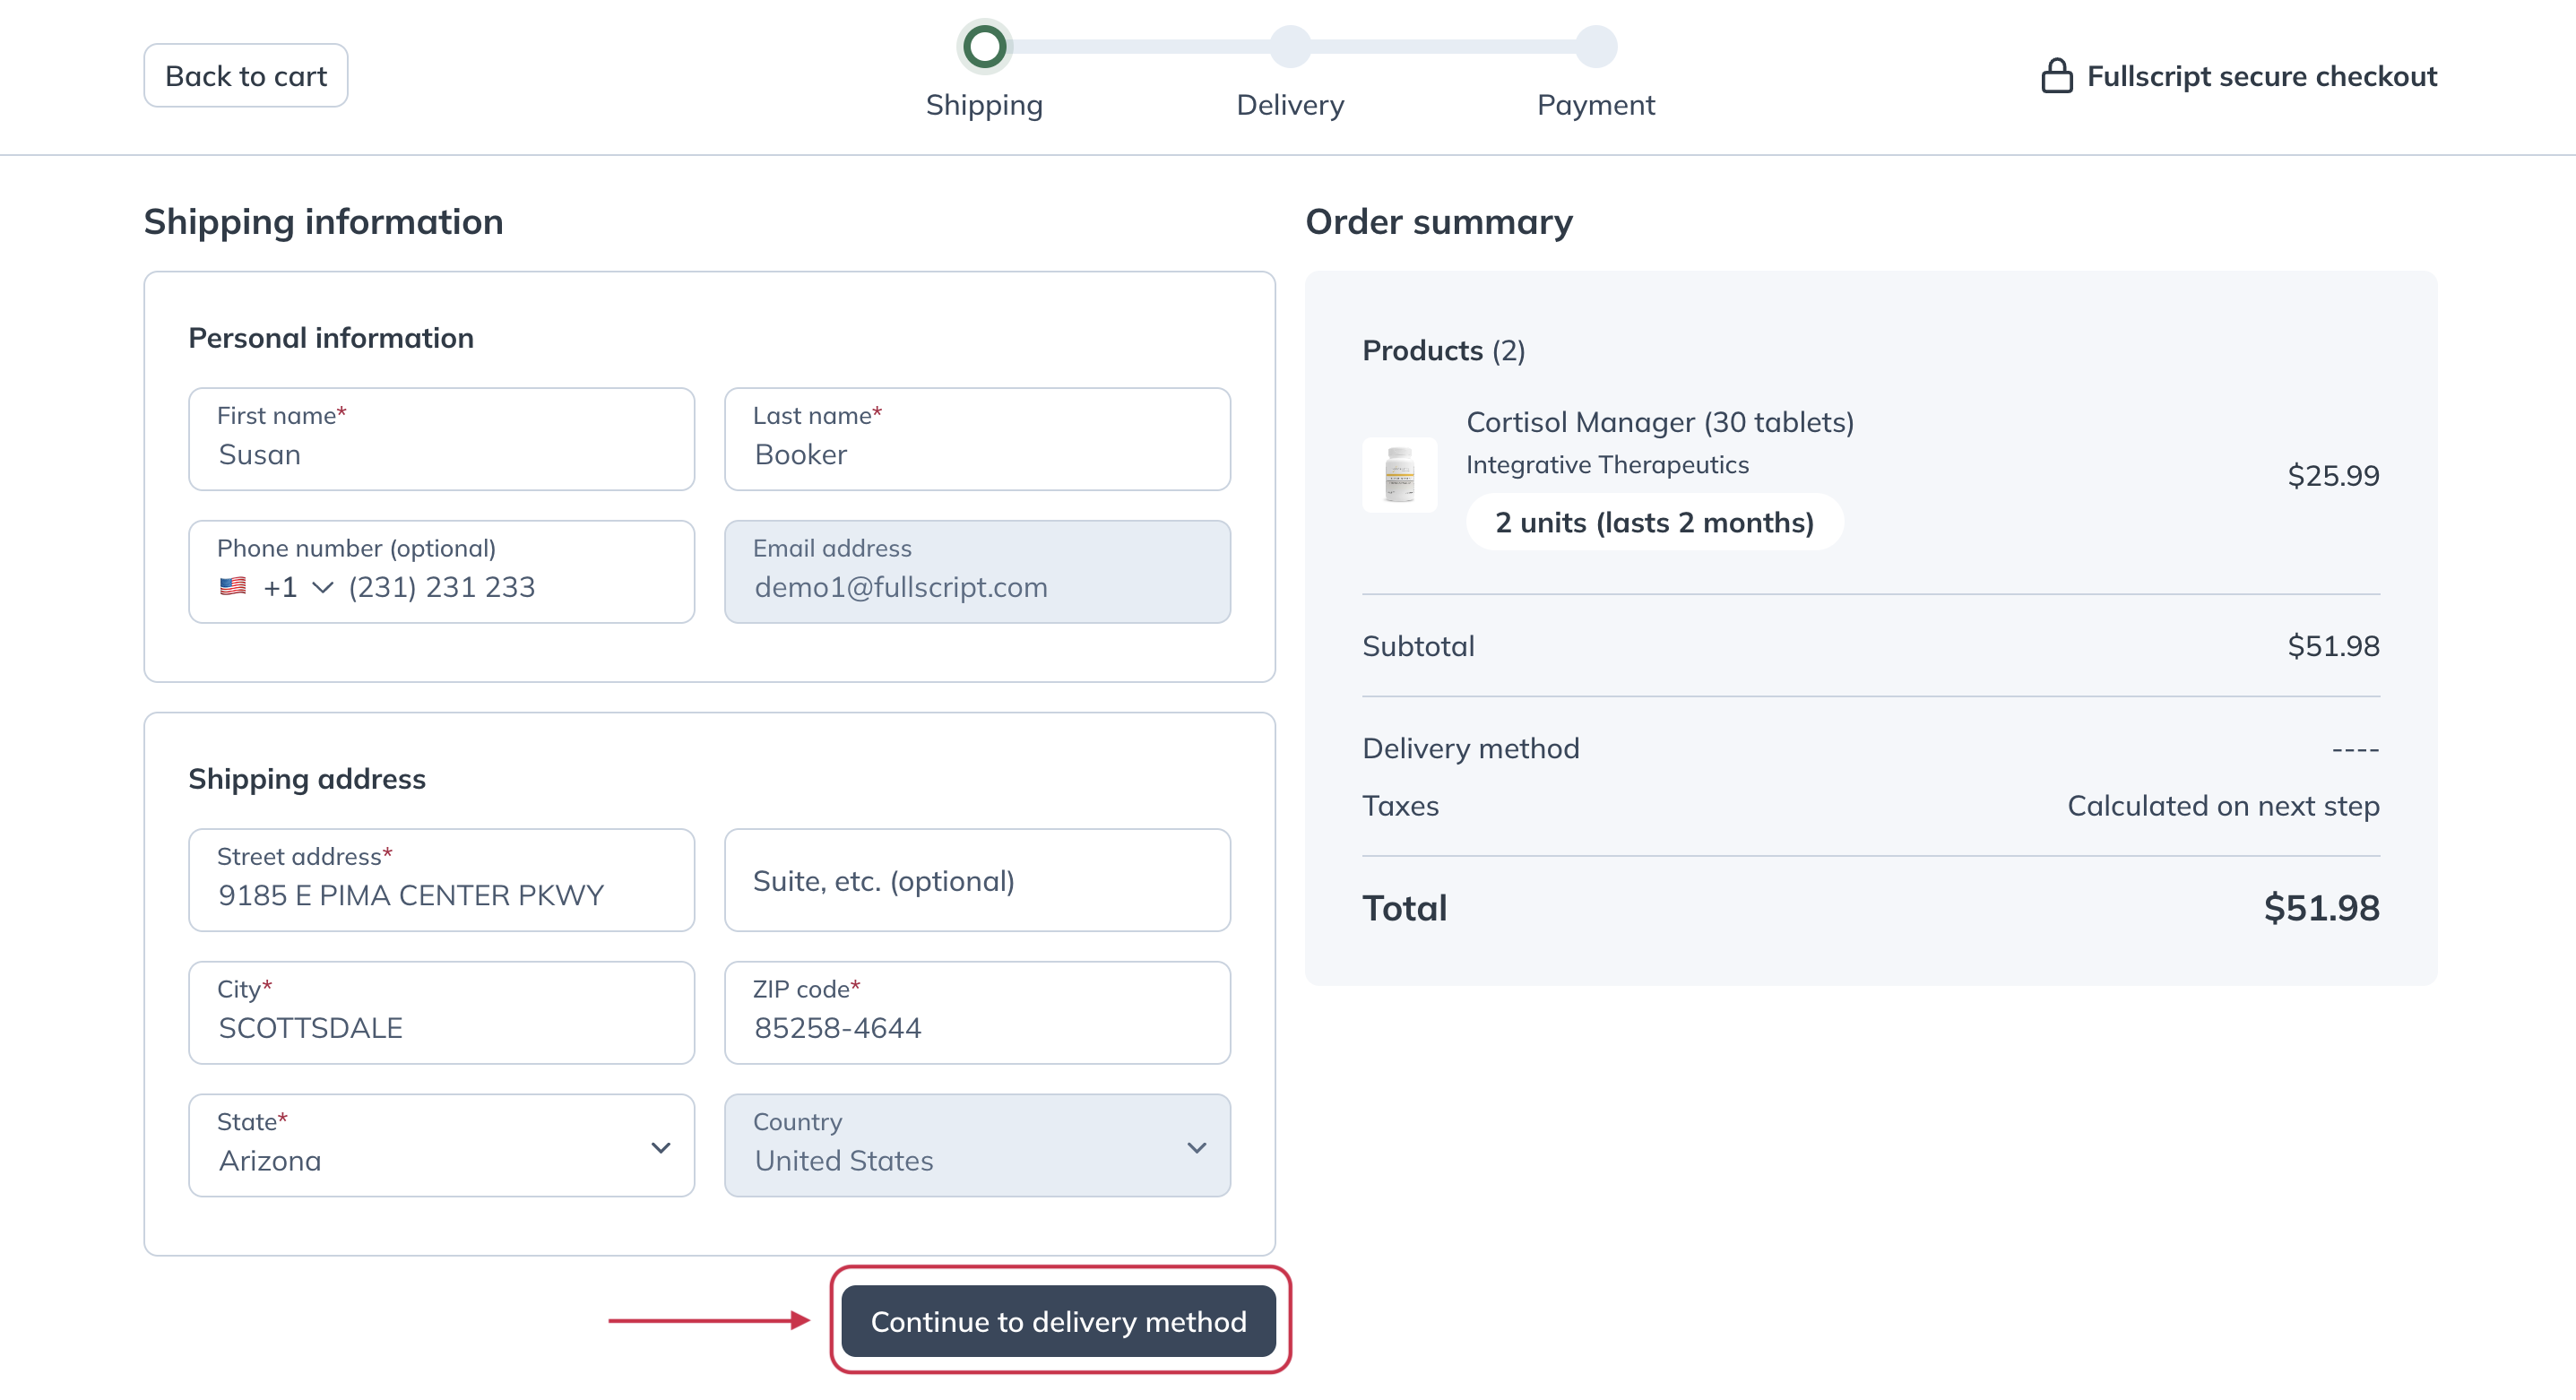 Input delivery address in open form when checkout is launched.